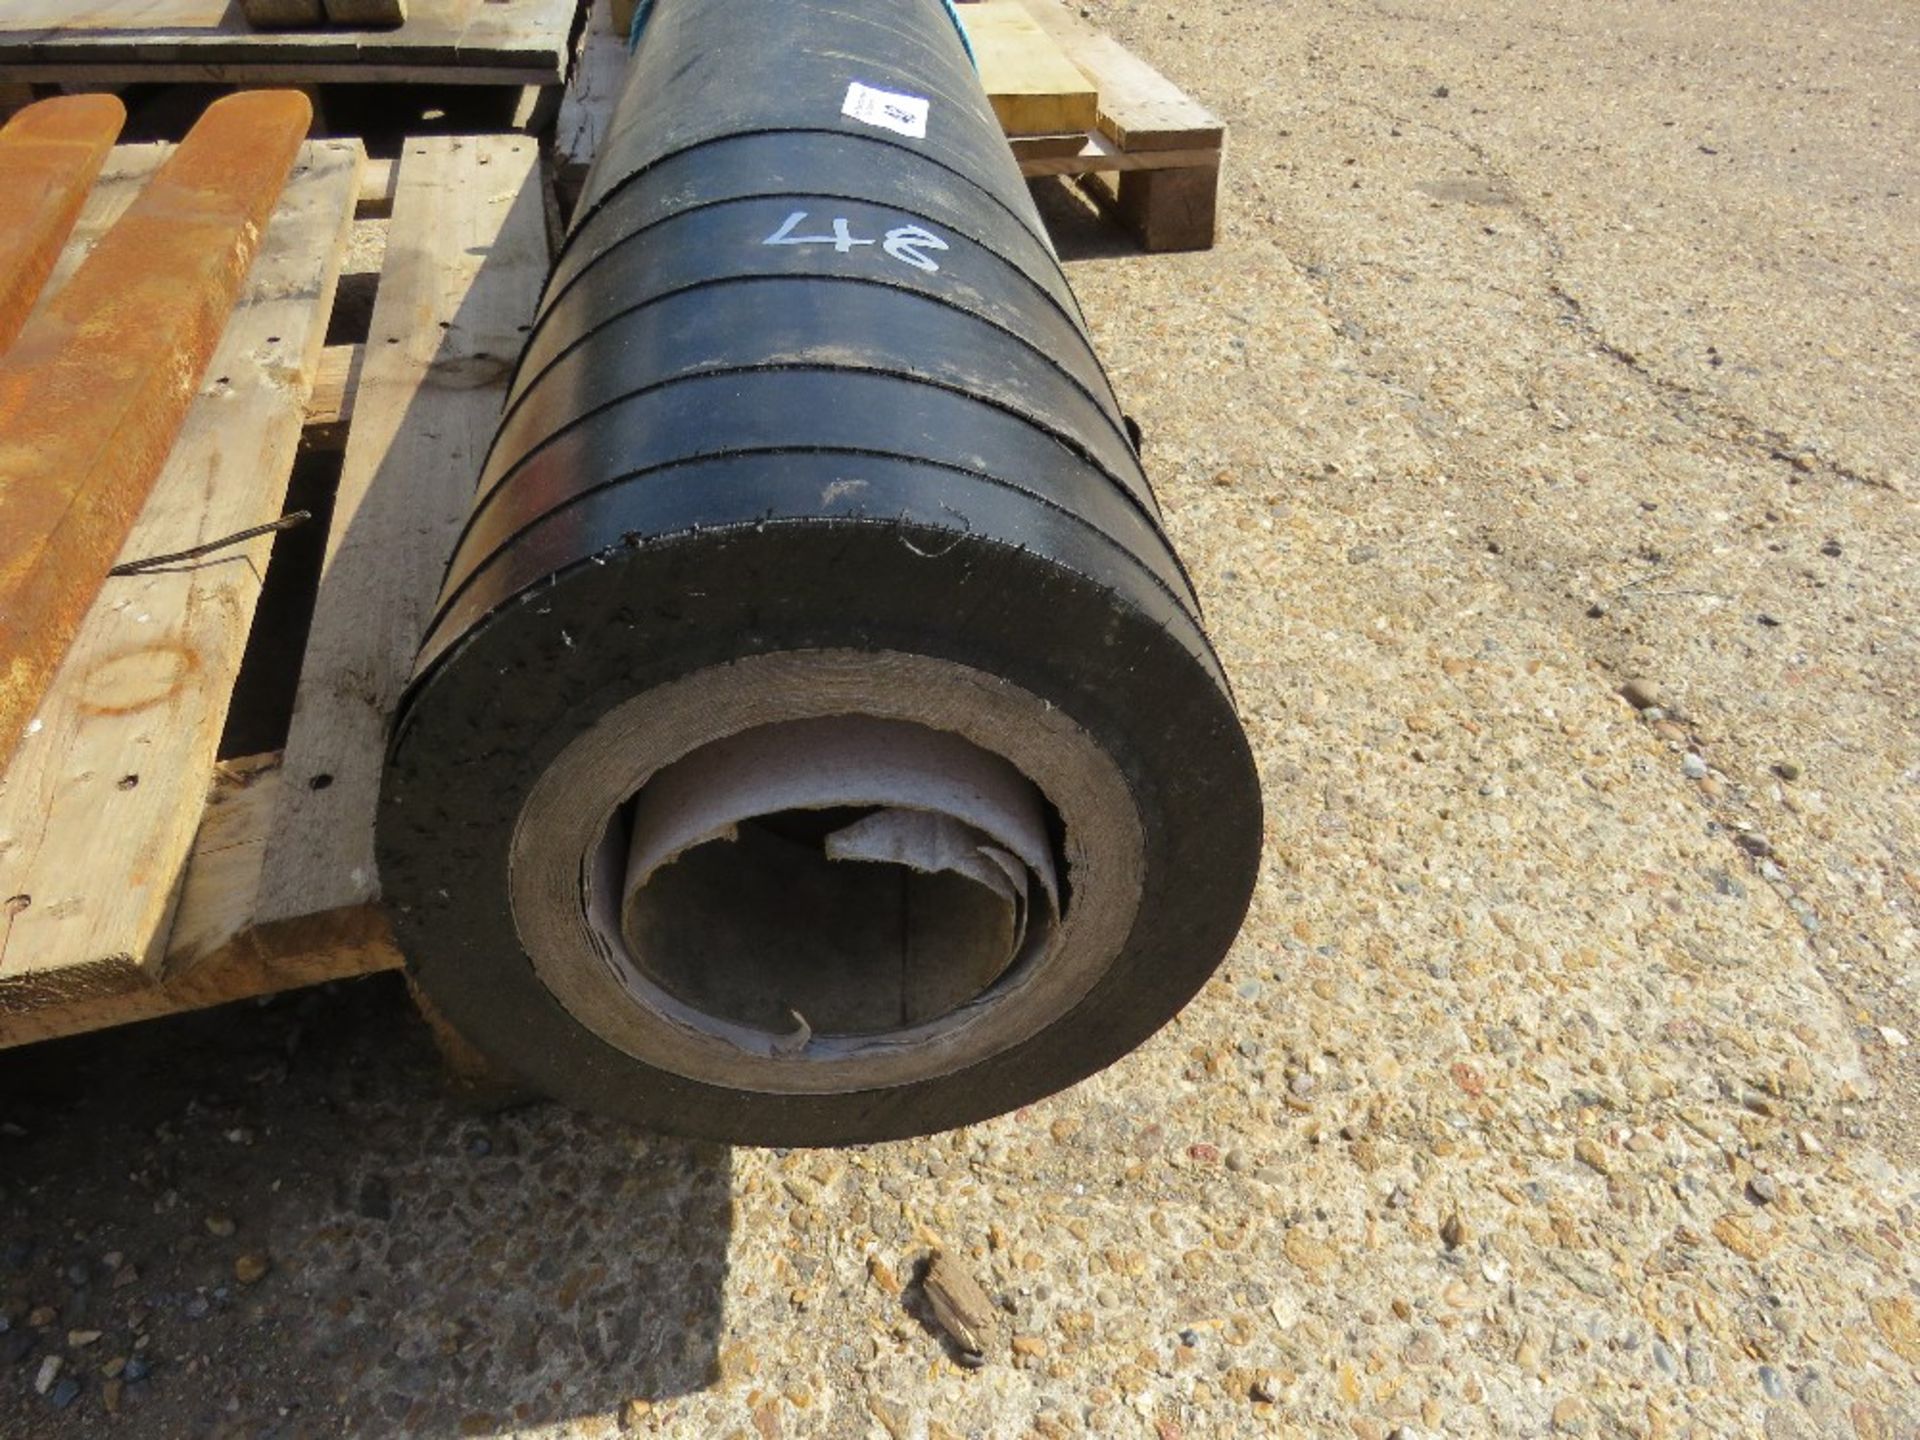 LARGE ROLL OF HEAVY DUTY MEMBRANE MATERIAL, 9FT WIDTH APPROX. - Image 3 of 6